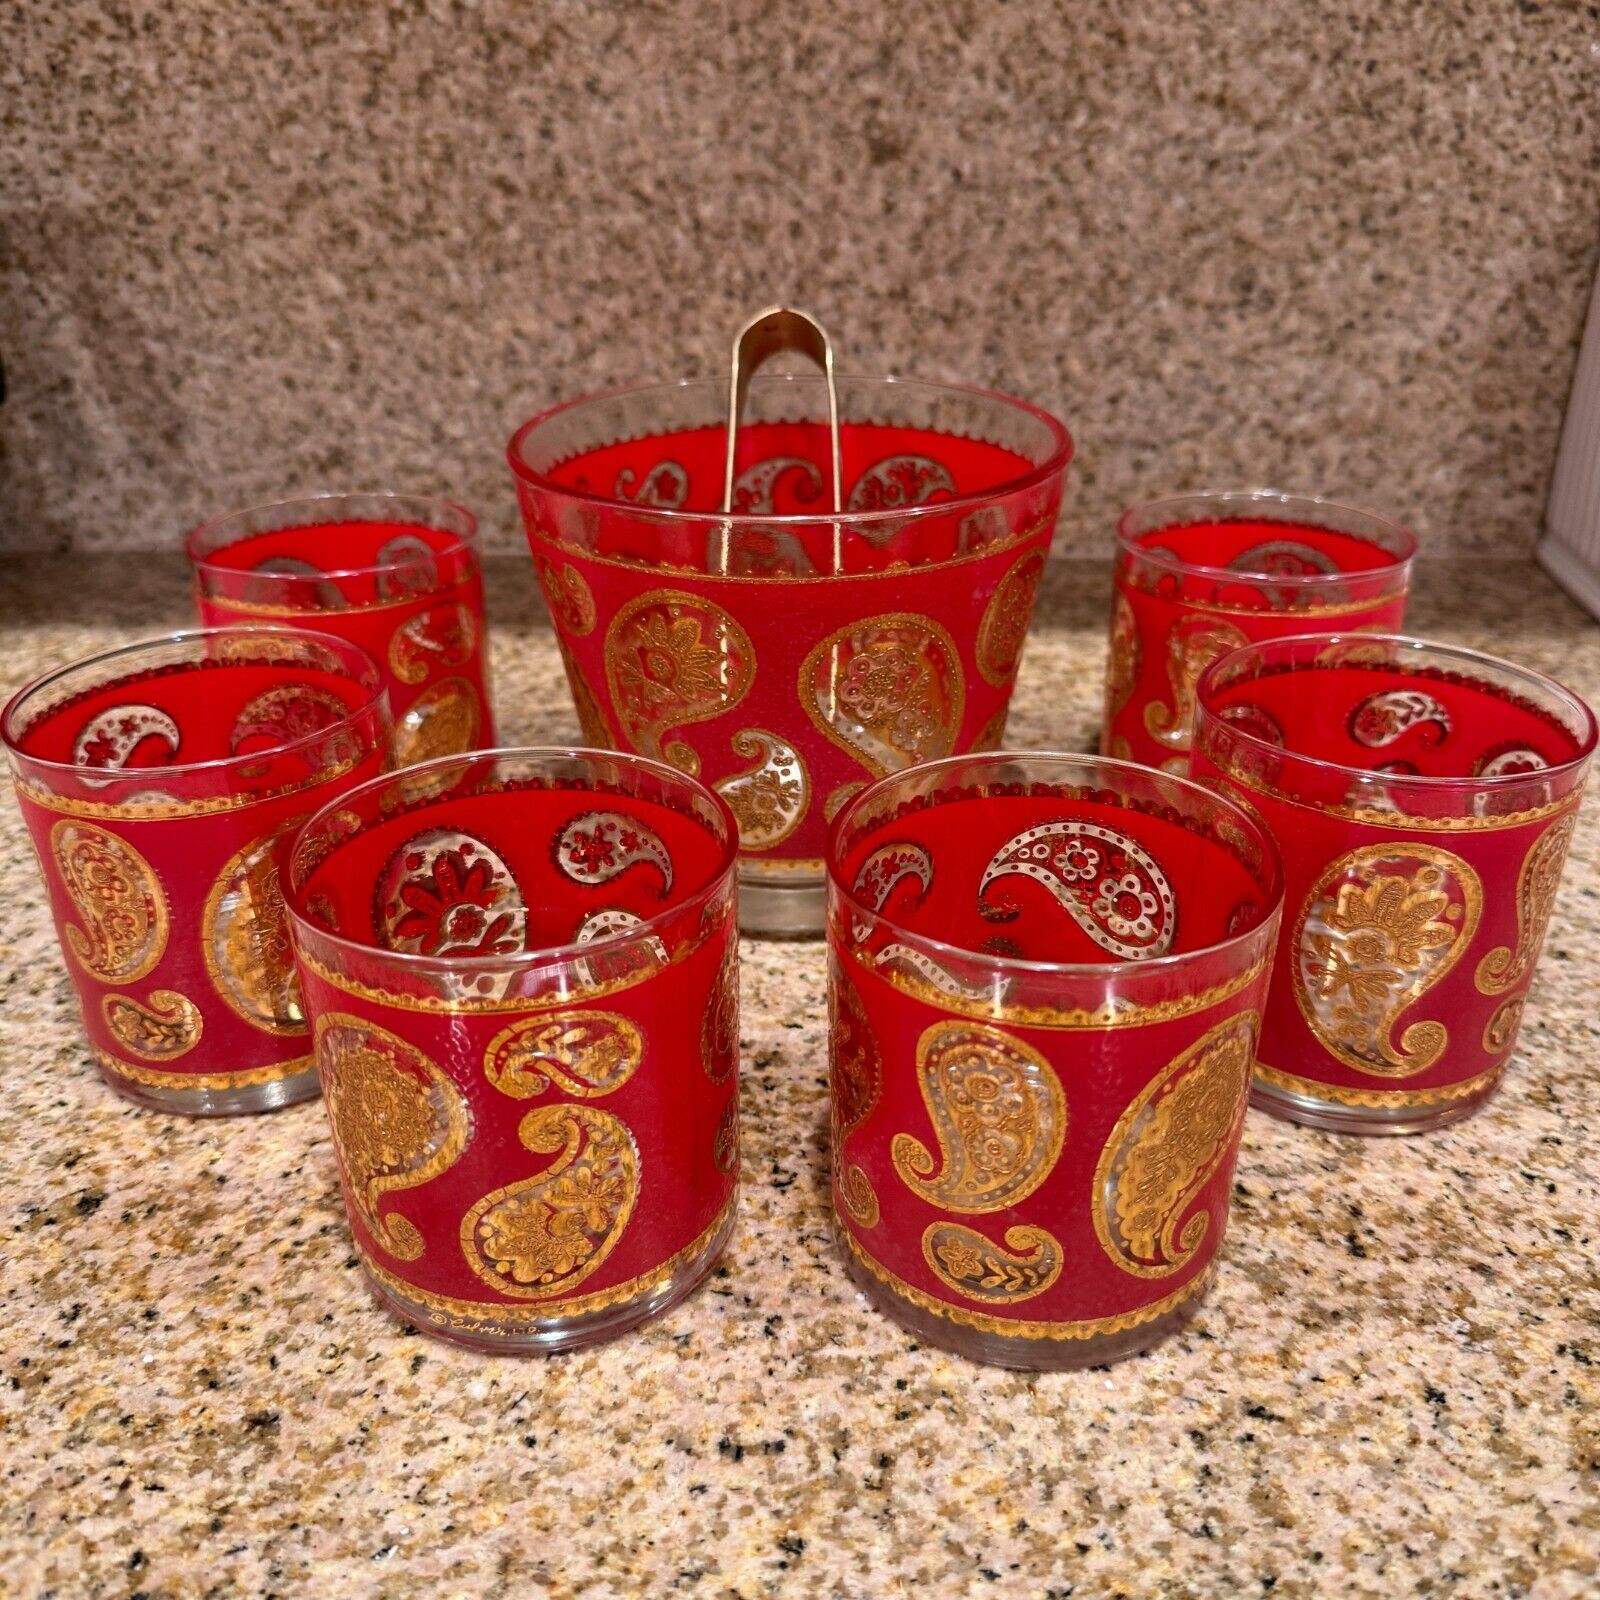 Vintage 1960s Culver Paisley Whiskey Glasses Ice Bucket Set Red 22k Gold Foil